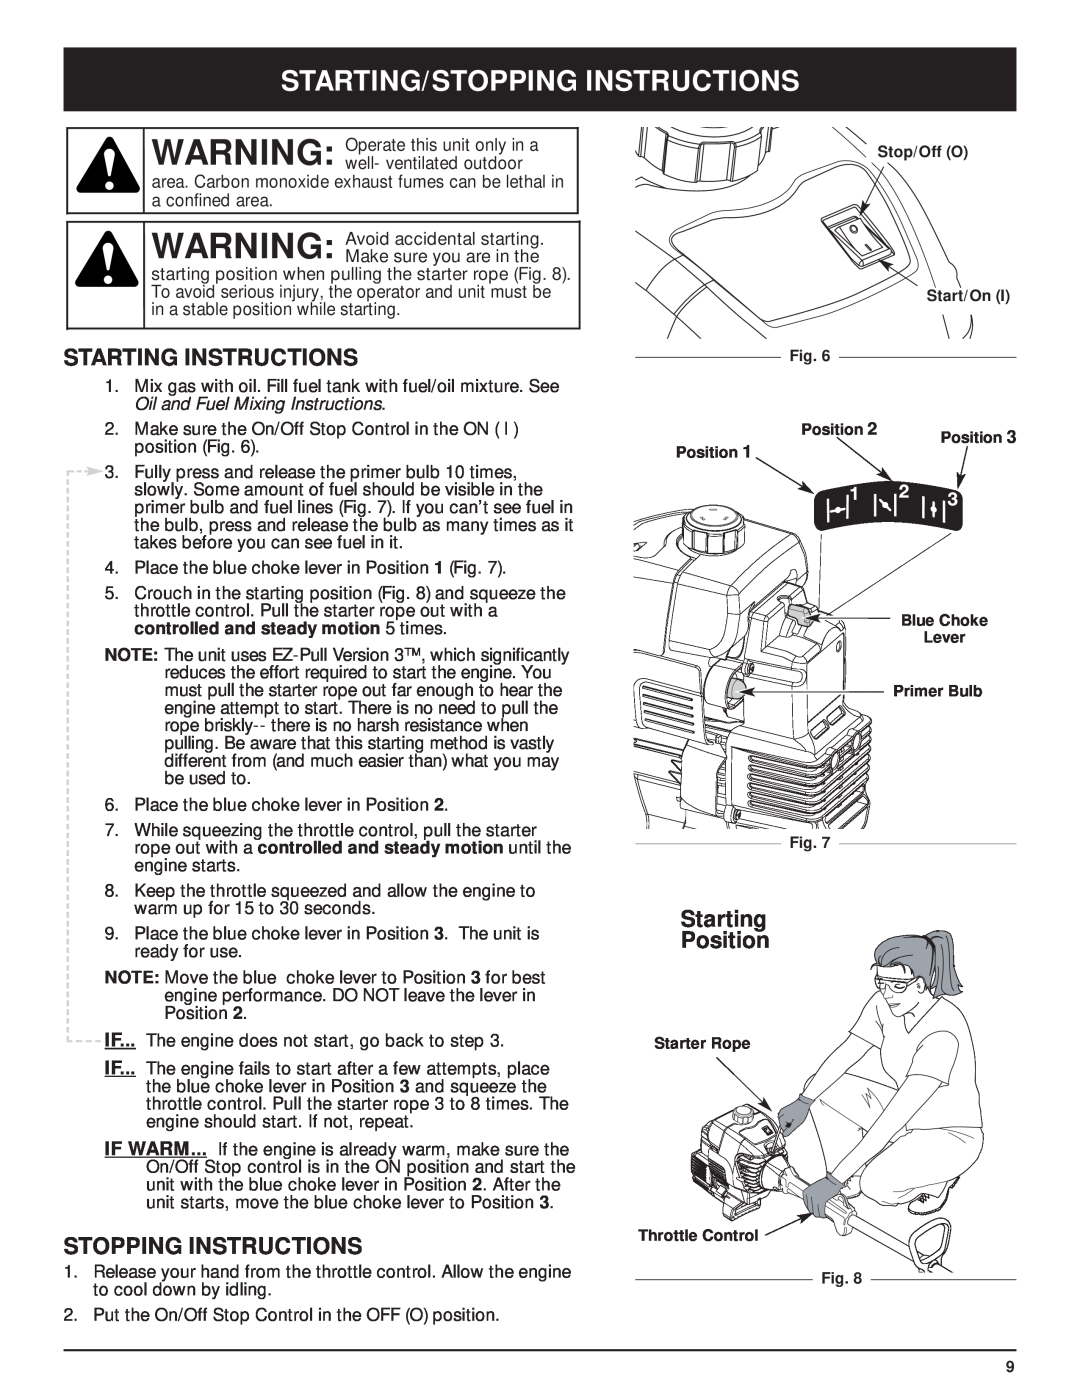 MTD MT700 manual Starting/Stopping Instructions, Starting Instructions, Starting Position 